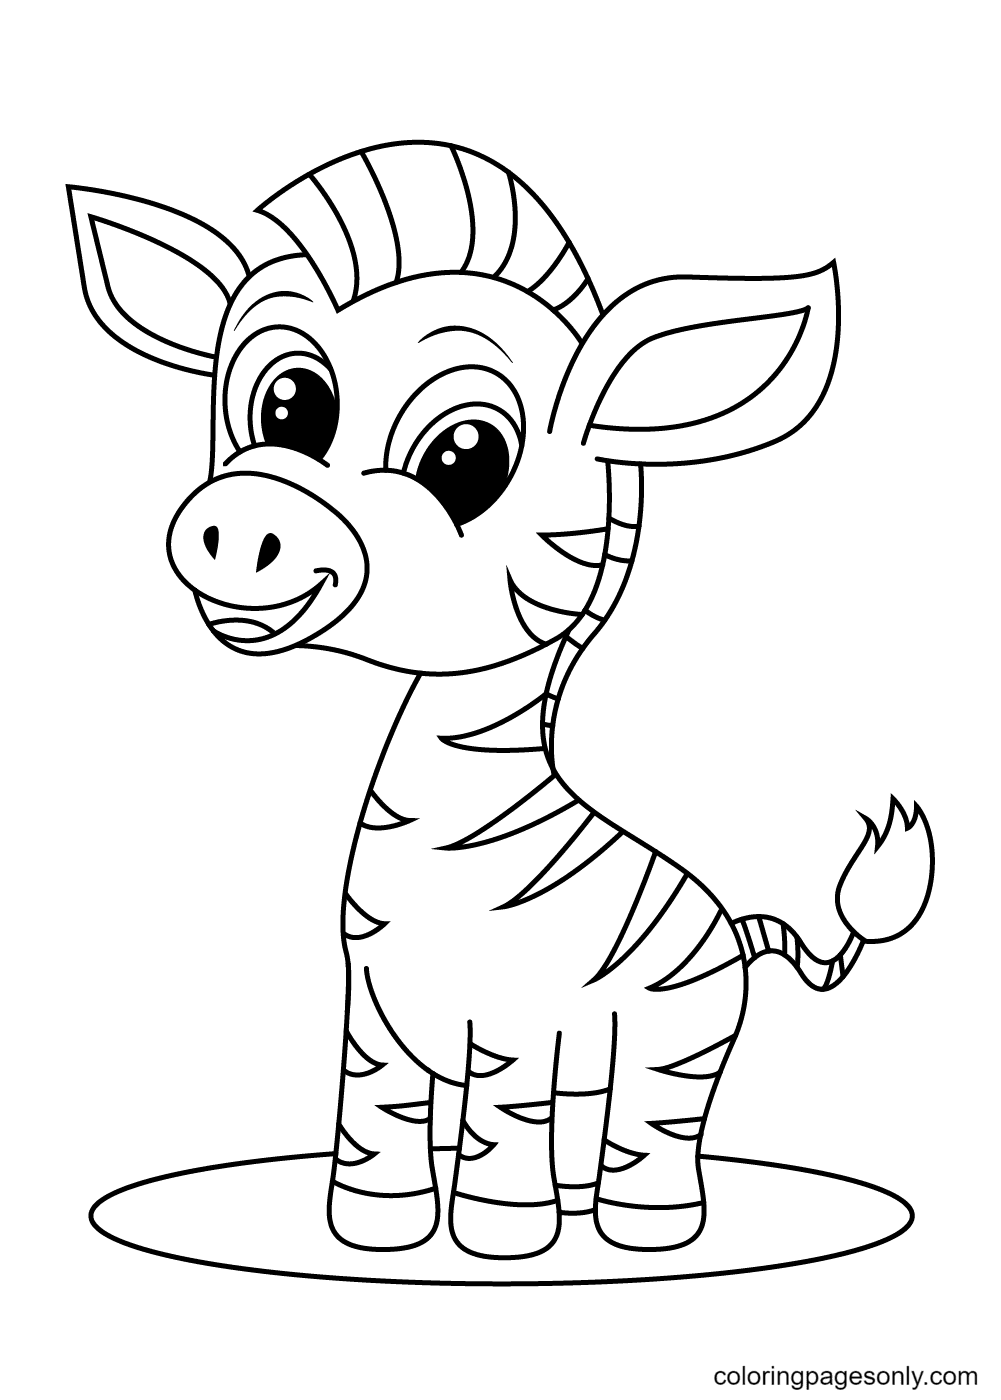 A Zebra with cute little and short legs Coloring Page